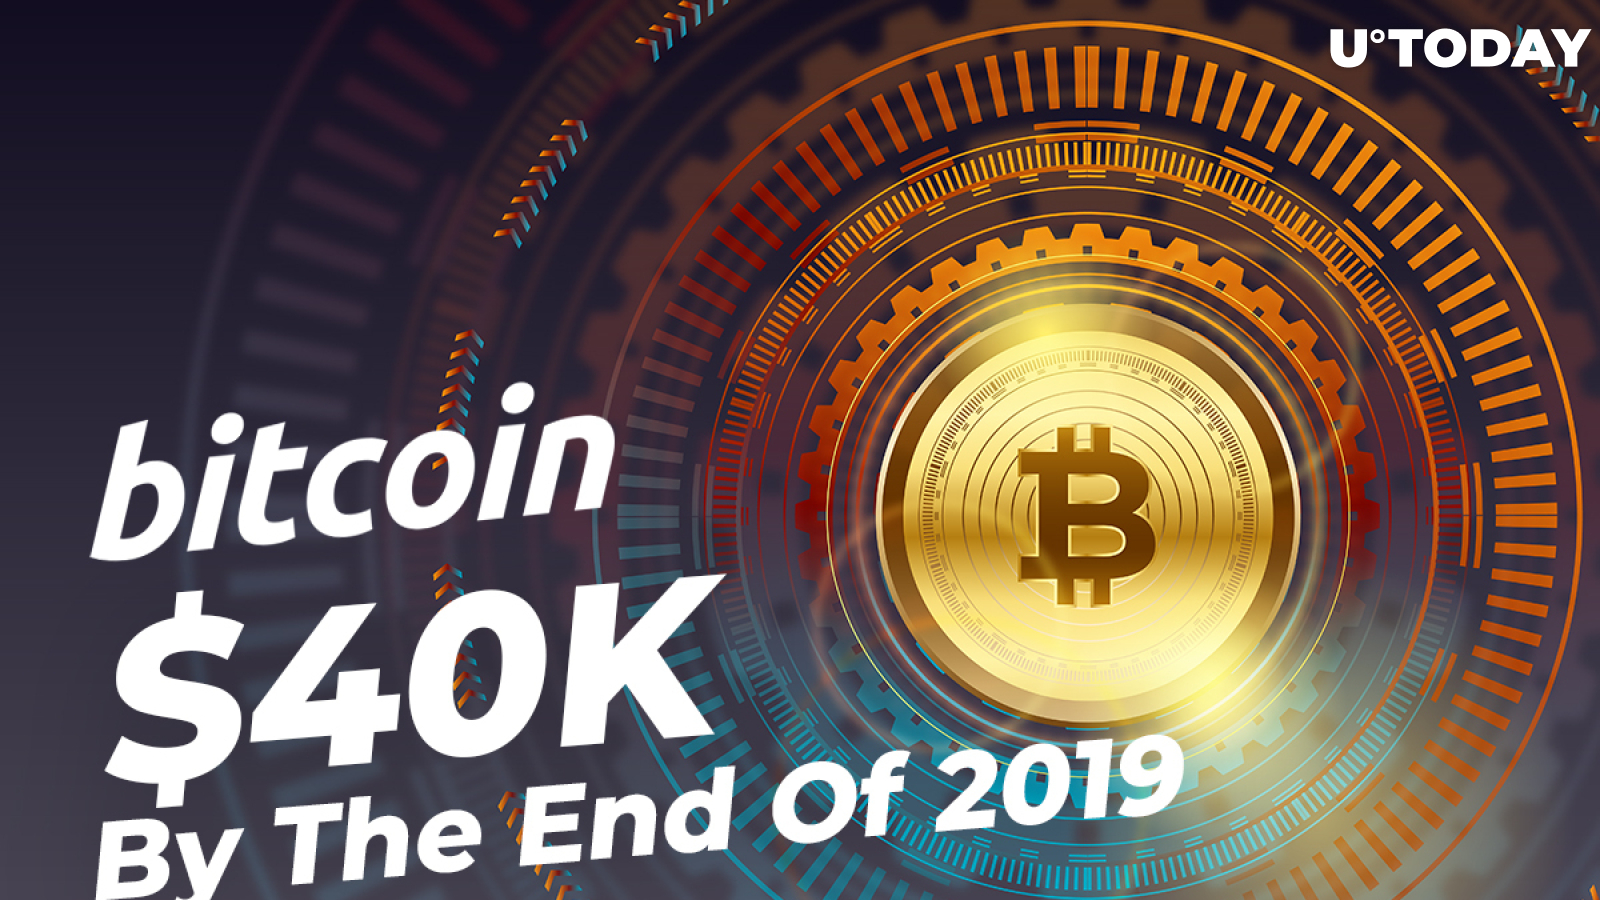 BTC Price Targets $10K in a Month and $40K by the End of 2019: Mass FOMO Reigns over the Market